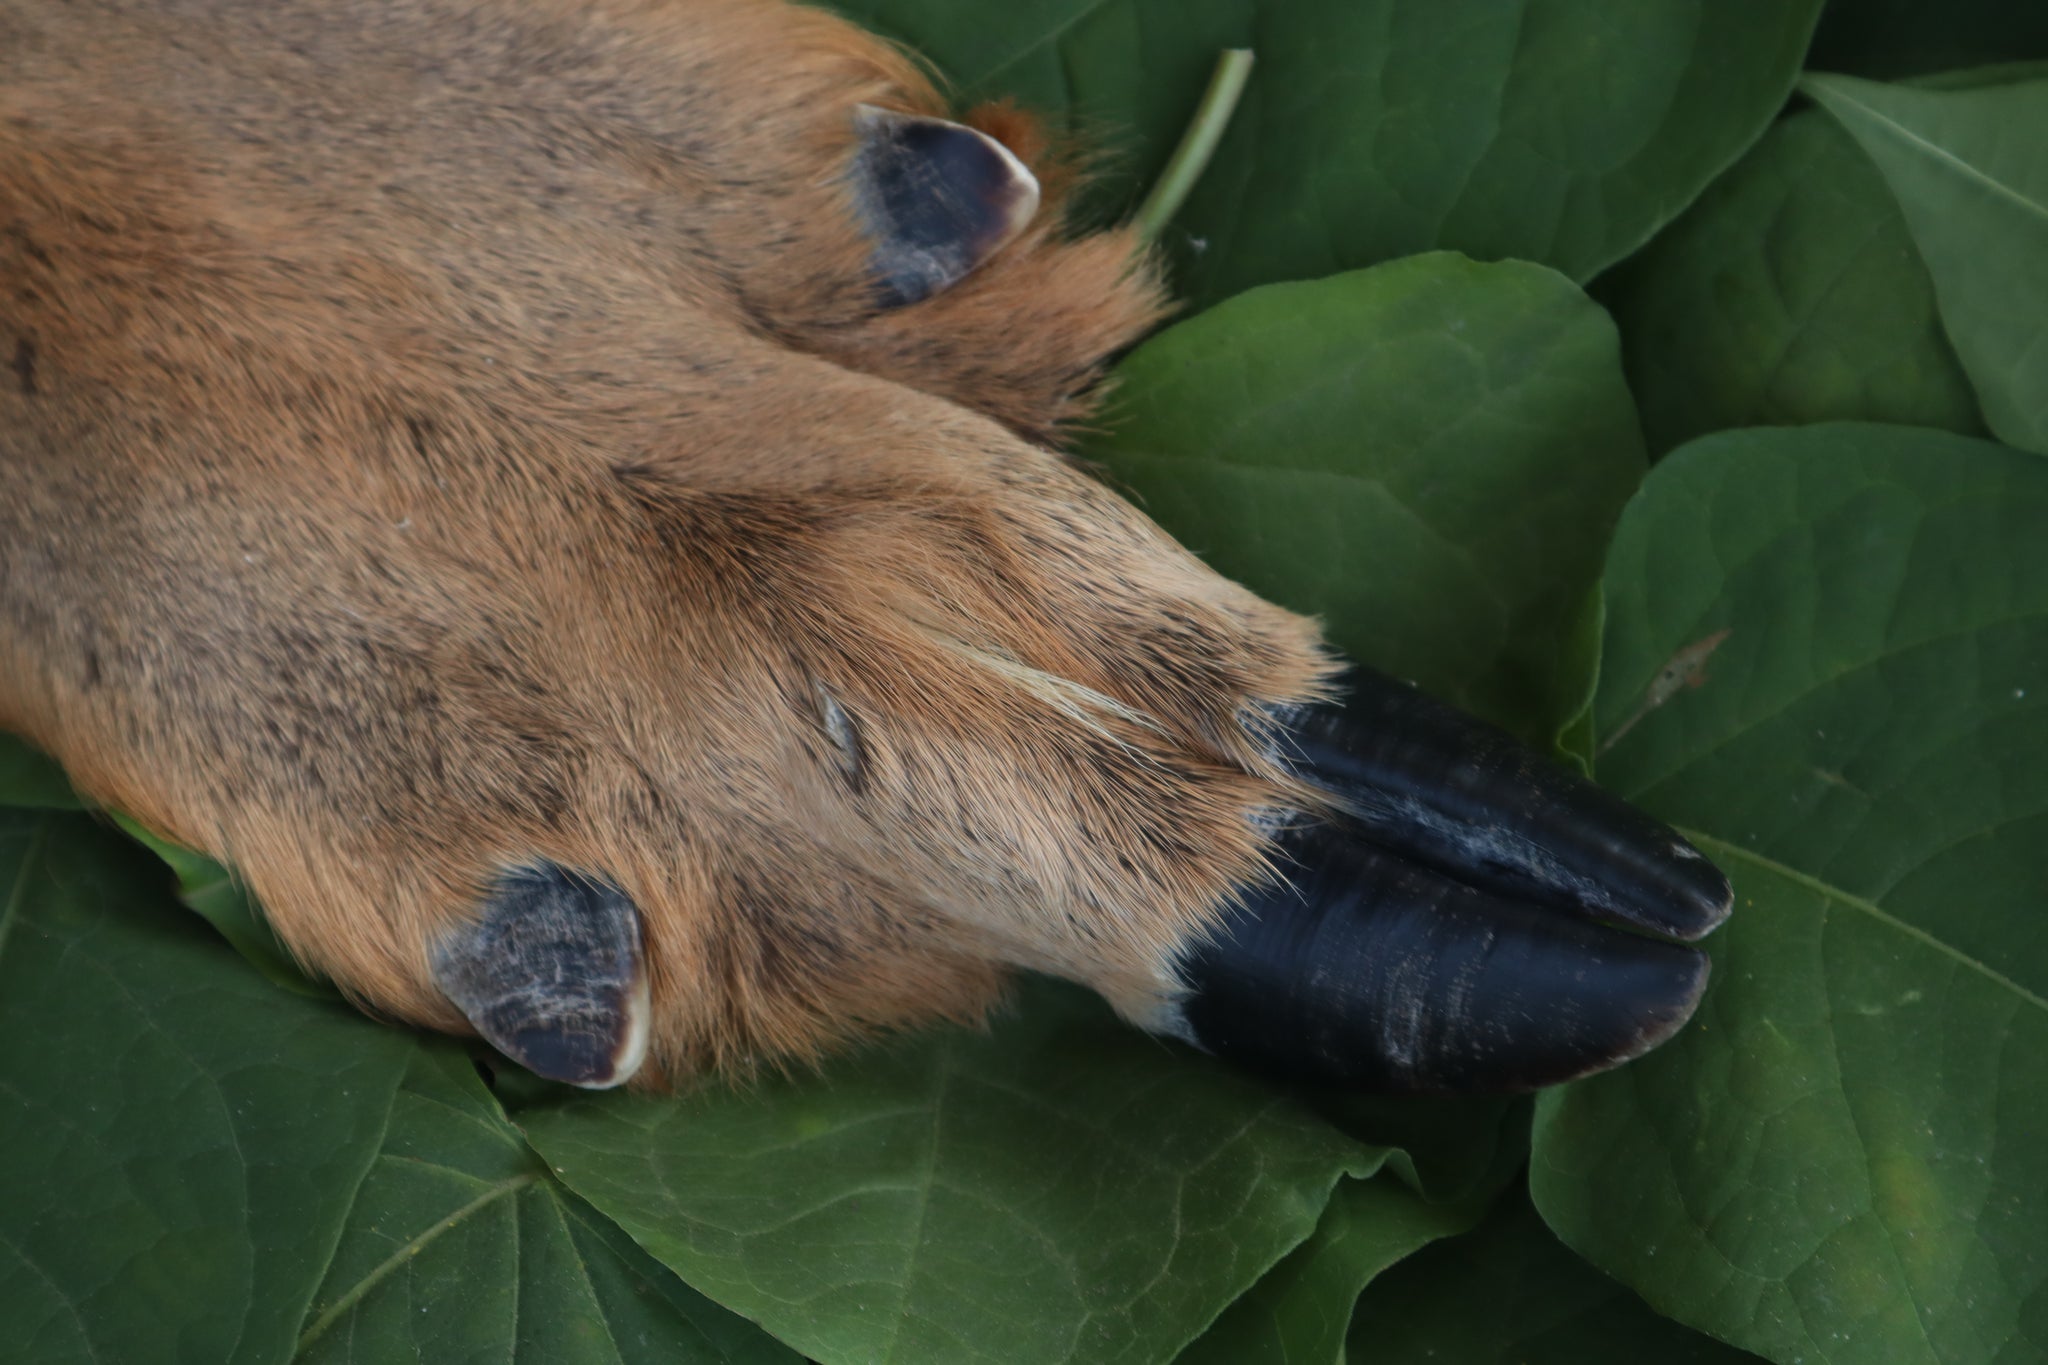 Soft Tanned Whitetail Deer Foot